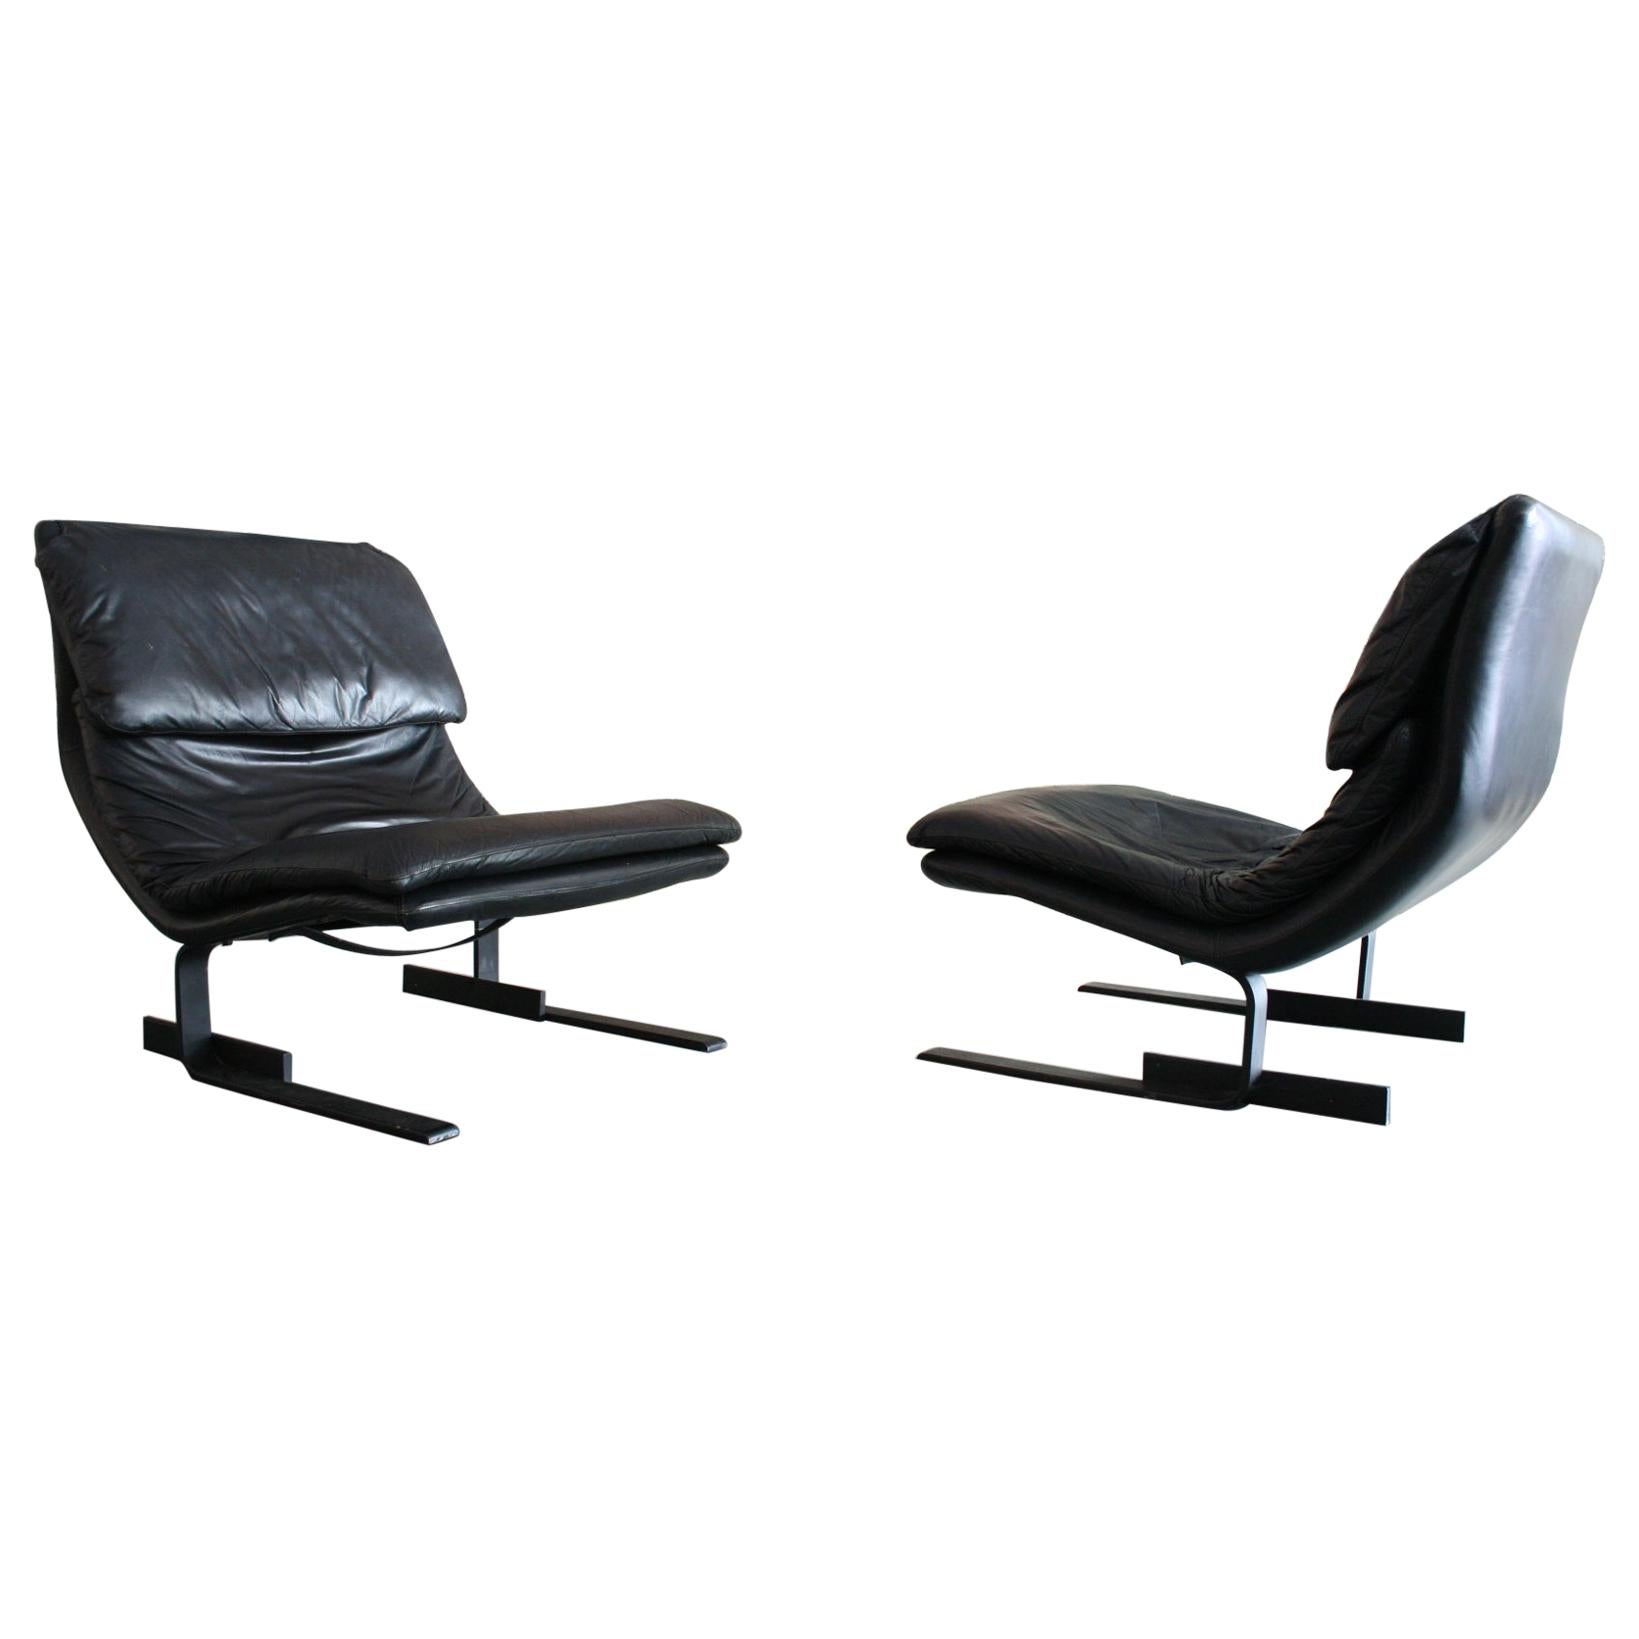 Pair of Leather Lounge Chairs by Giovanni Offredi for Saporiti Italy